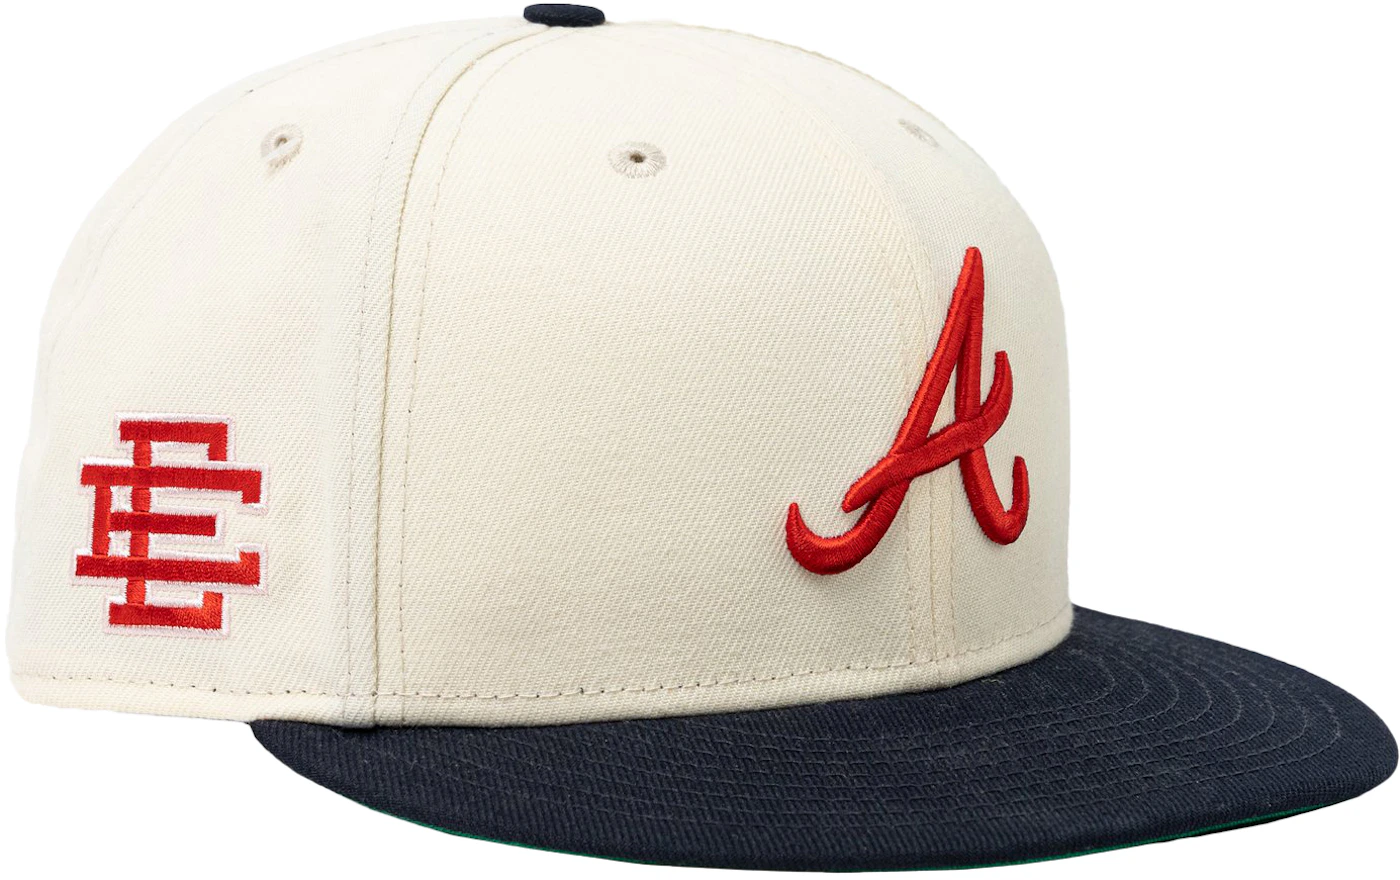 Eric Emanuel EE ATL 59Fifty New Era Fitted Hat Natural/Royal Men's ...